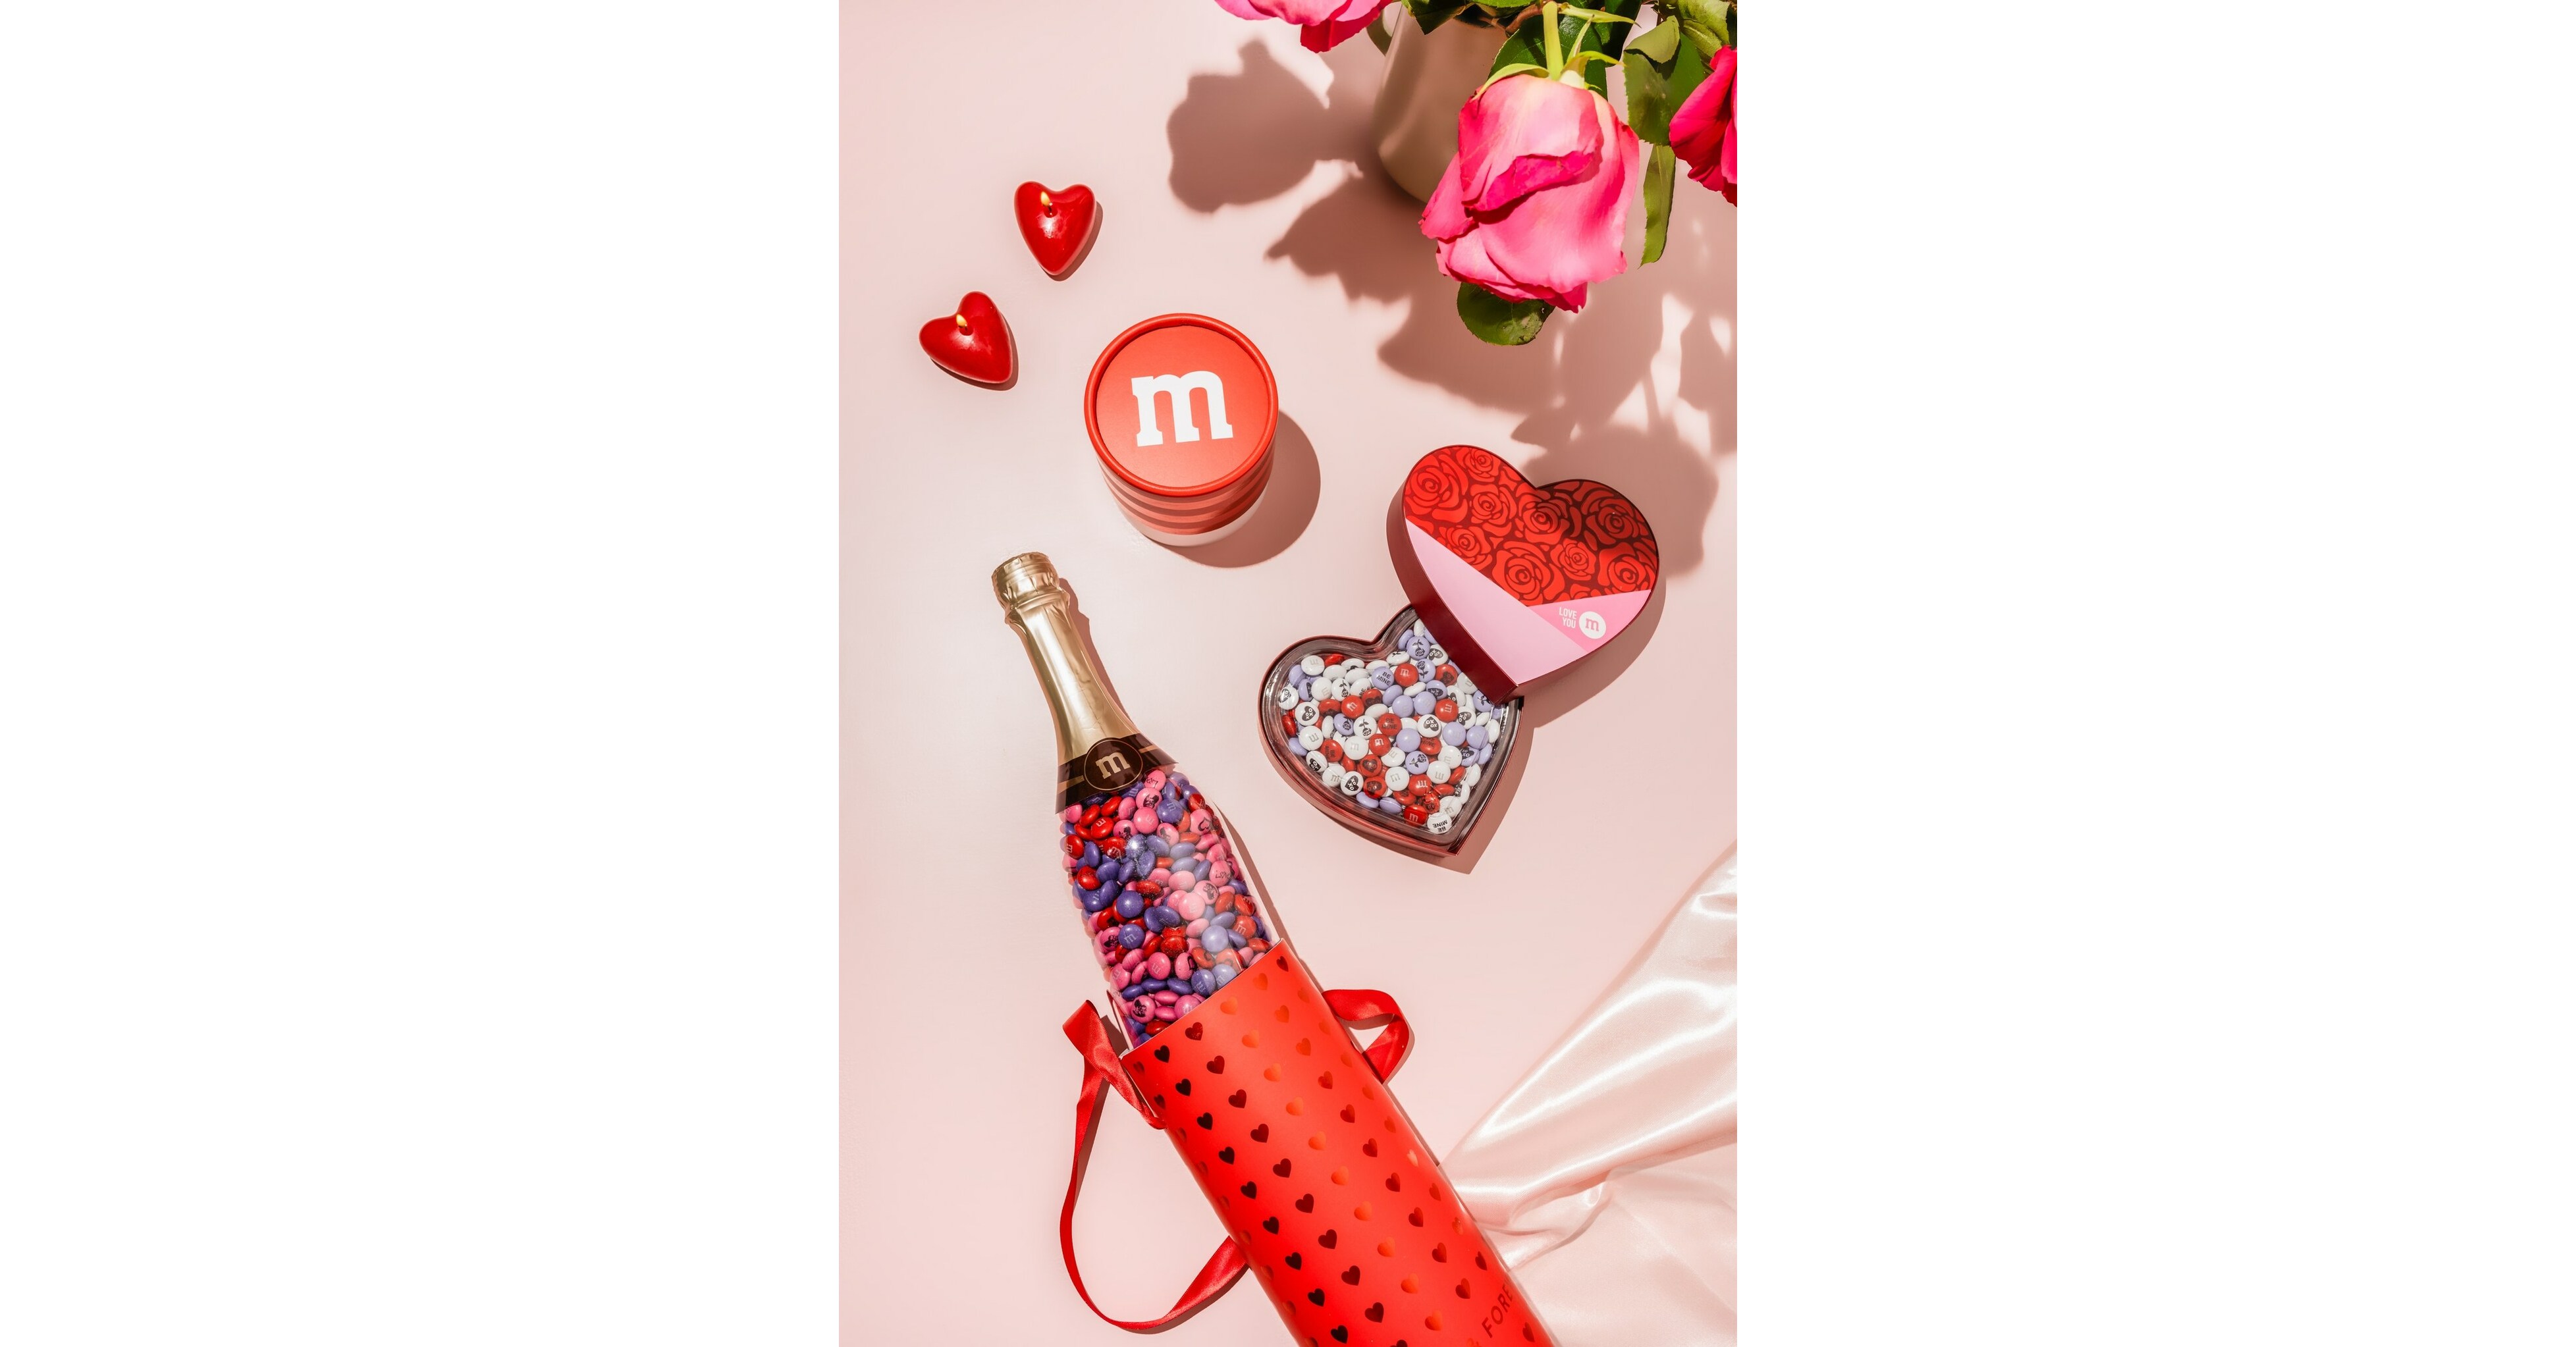 New Strawberry Shake M&M's Are Here for Valentine's Day